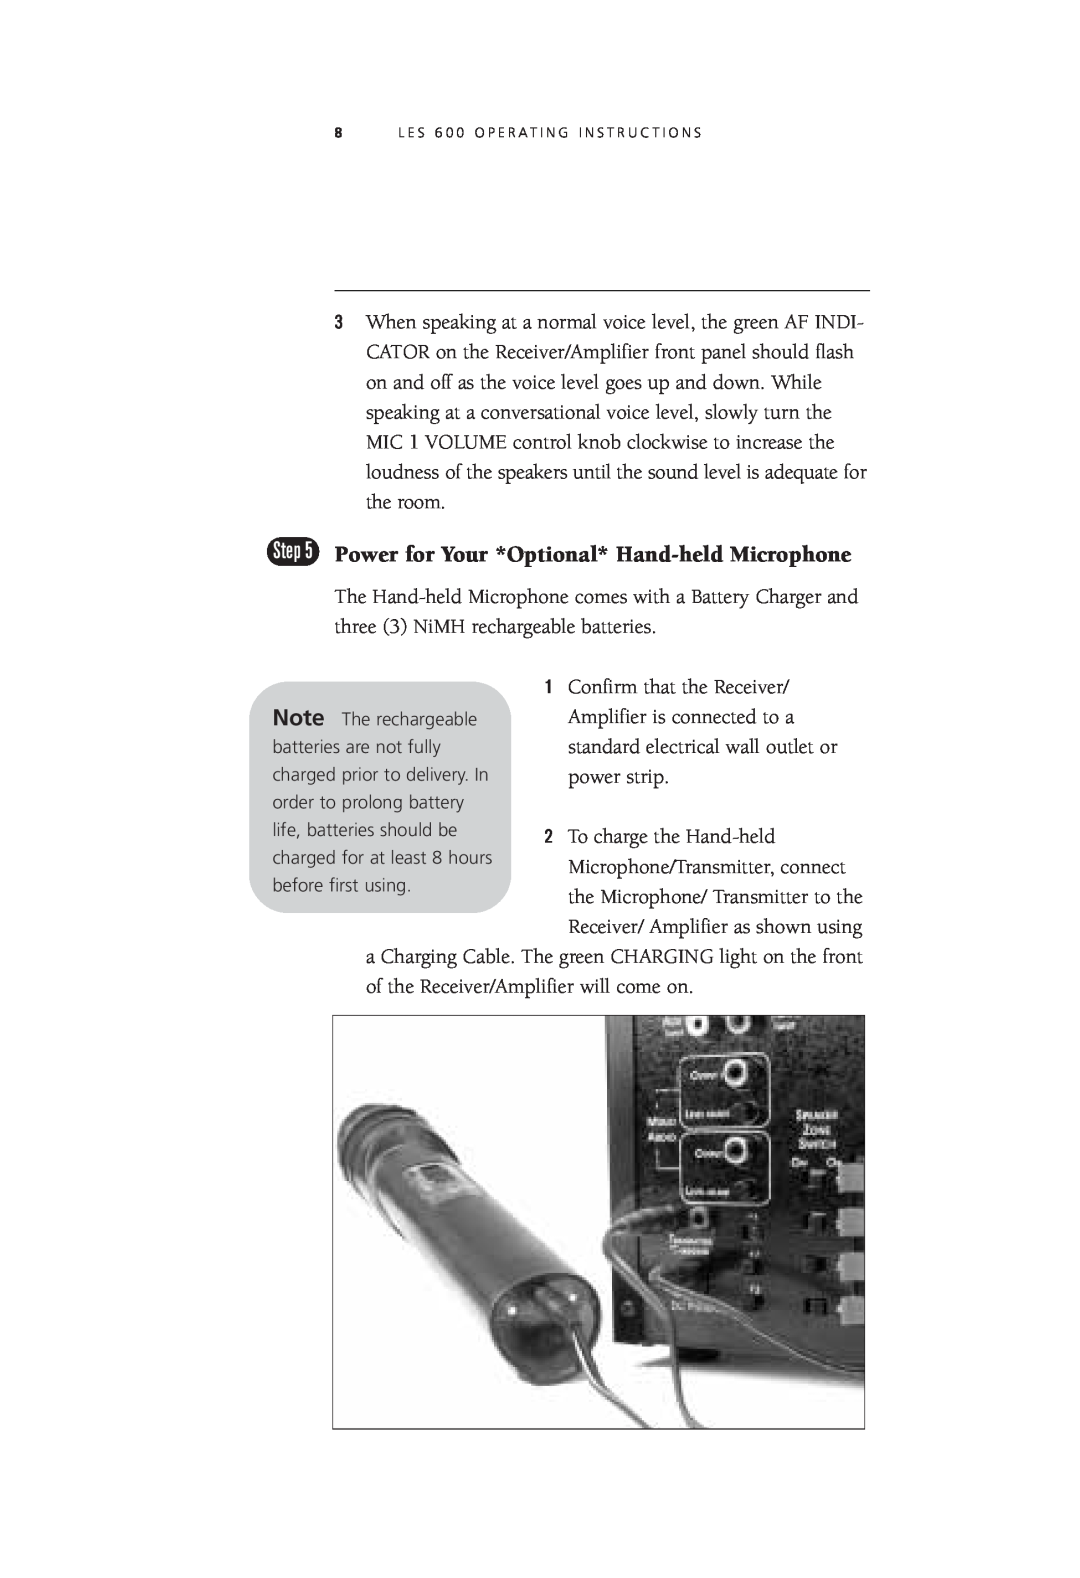 LightSpeed Technologies LES 600 Series user manual Confirm that the Receiver 